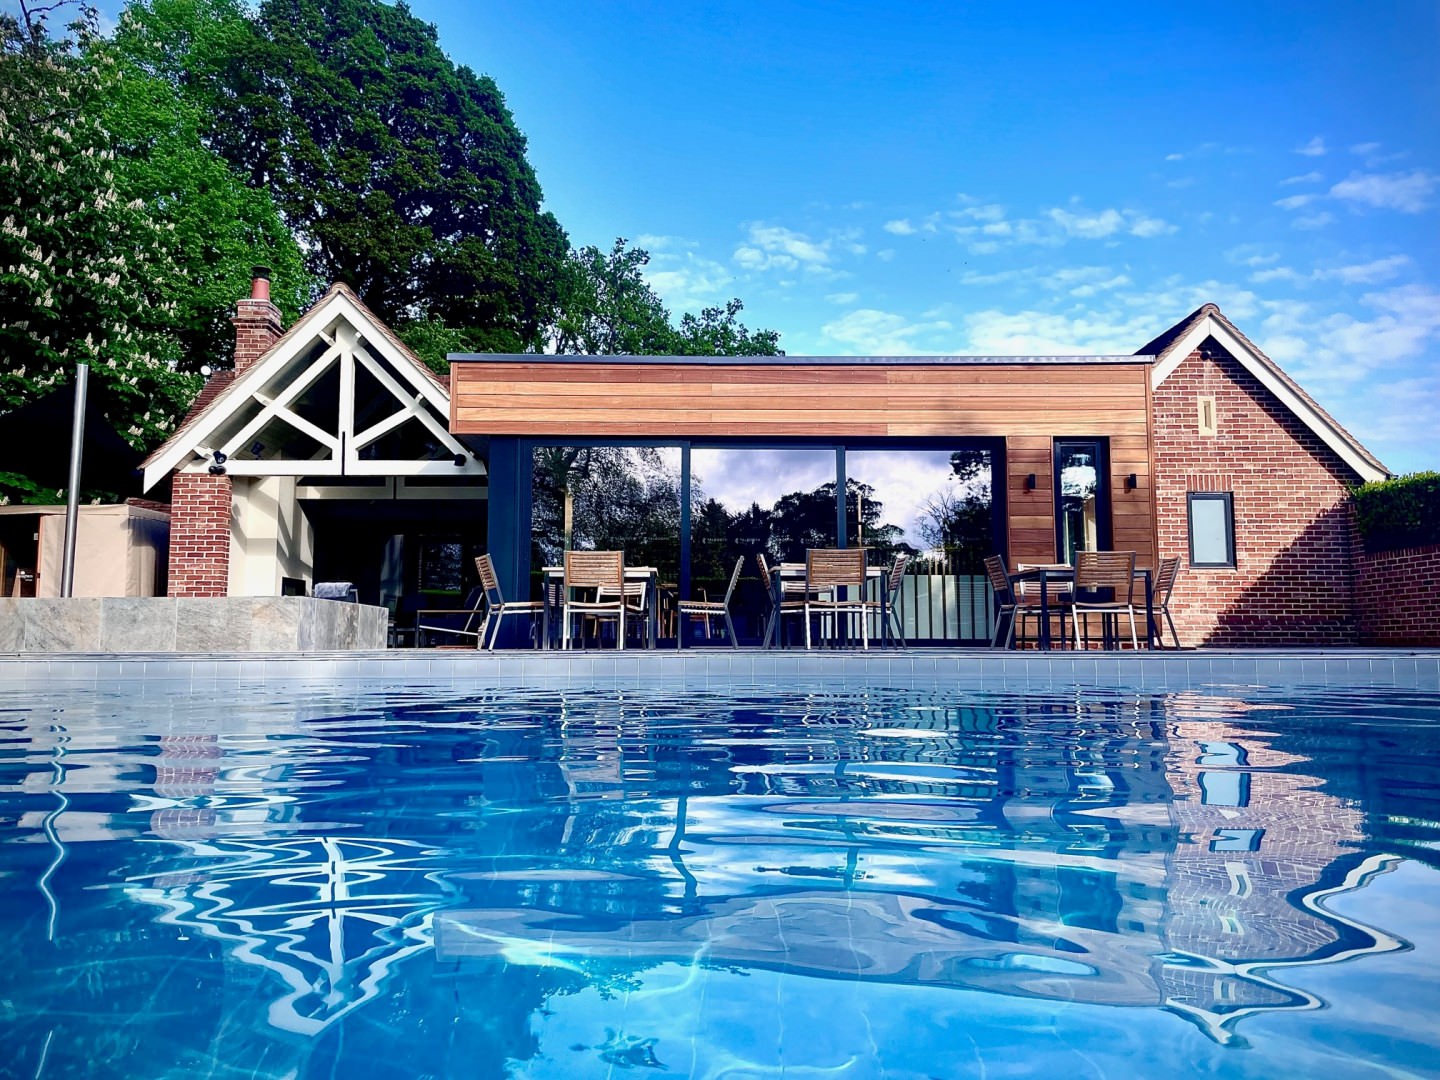 Summer Vale-cation at Talbooth House & Spa, Dedham